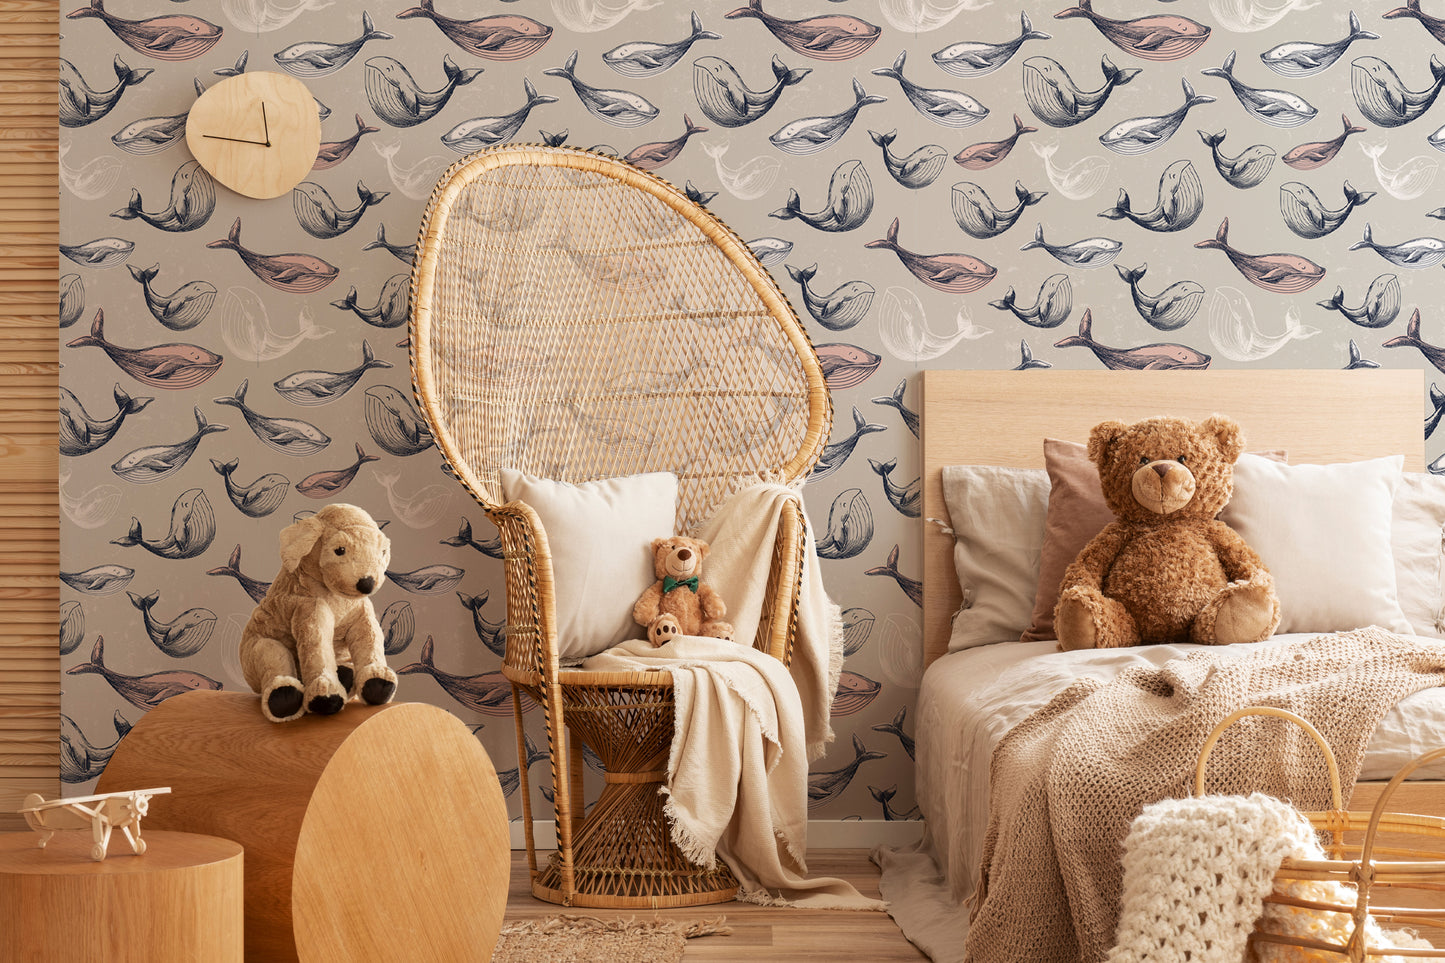 Pink Whale removable peel and stick wallpaper Nautical wallpaper